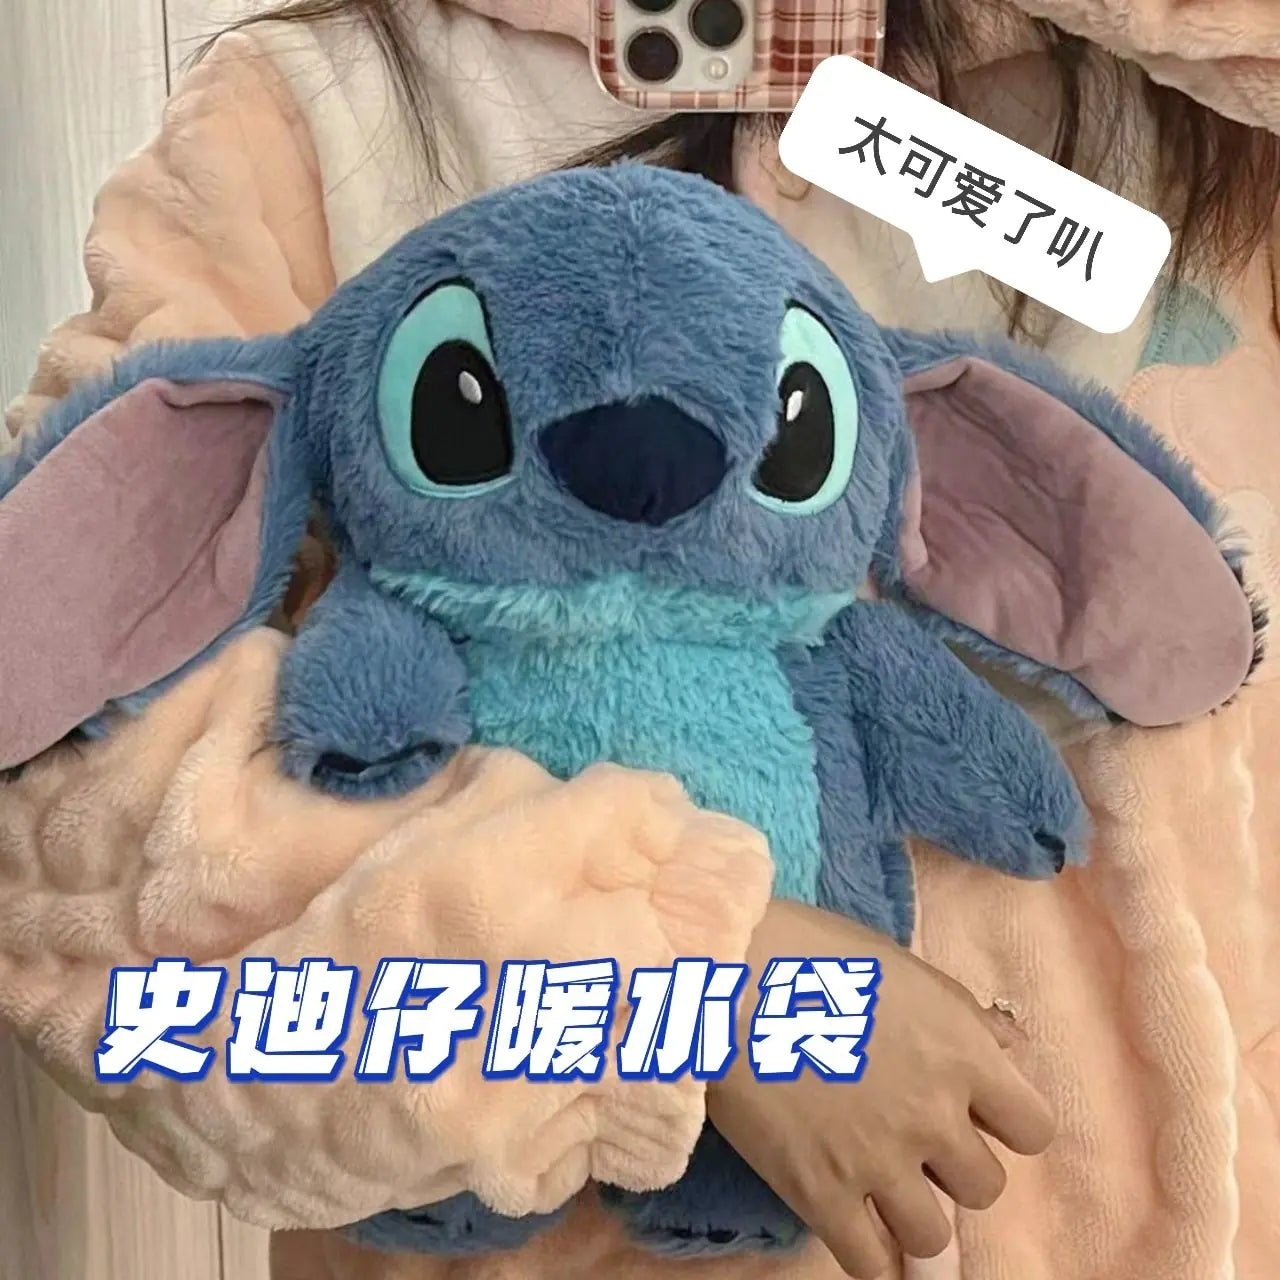 Stitch Plush Hot Water Bottle Set - Cozy Companion for Chilly Nights